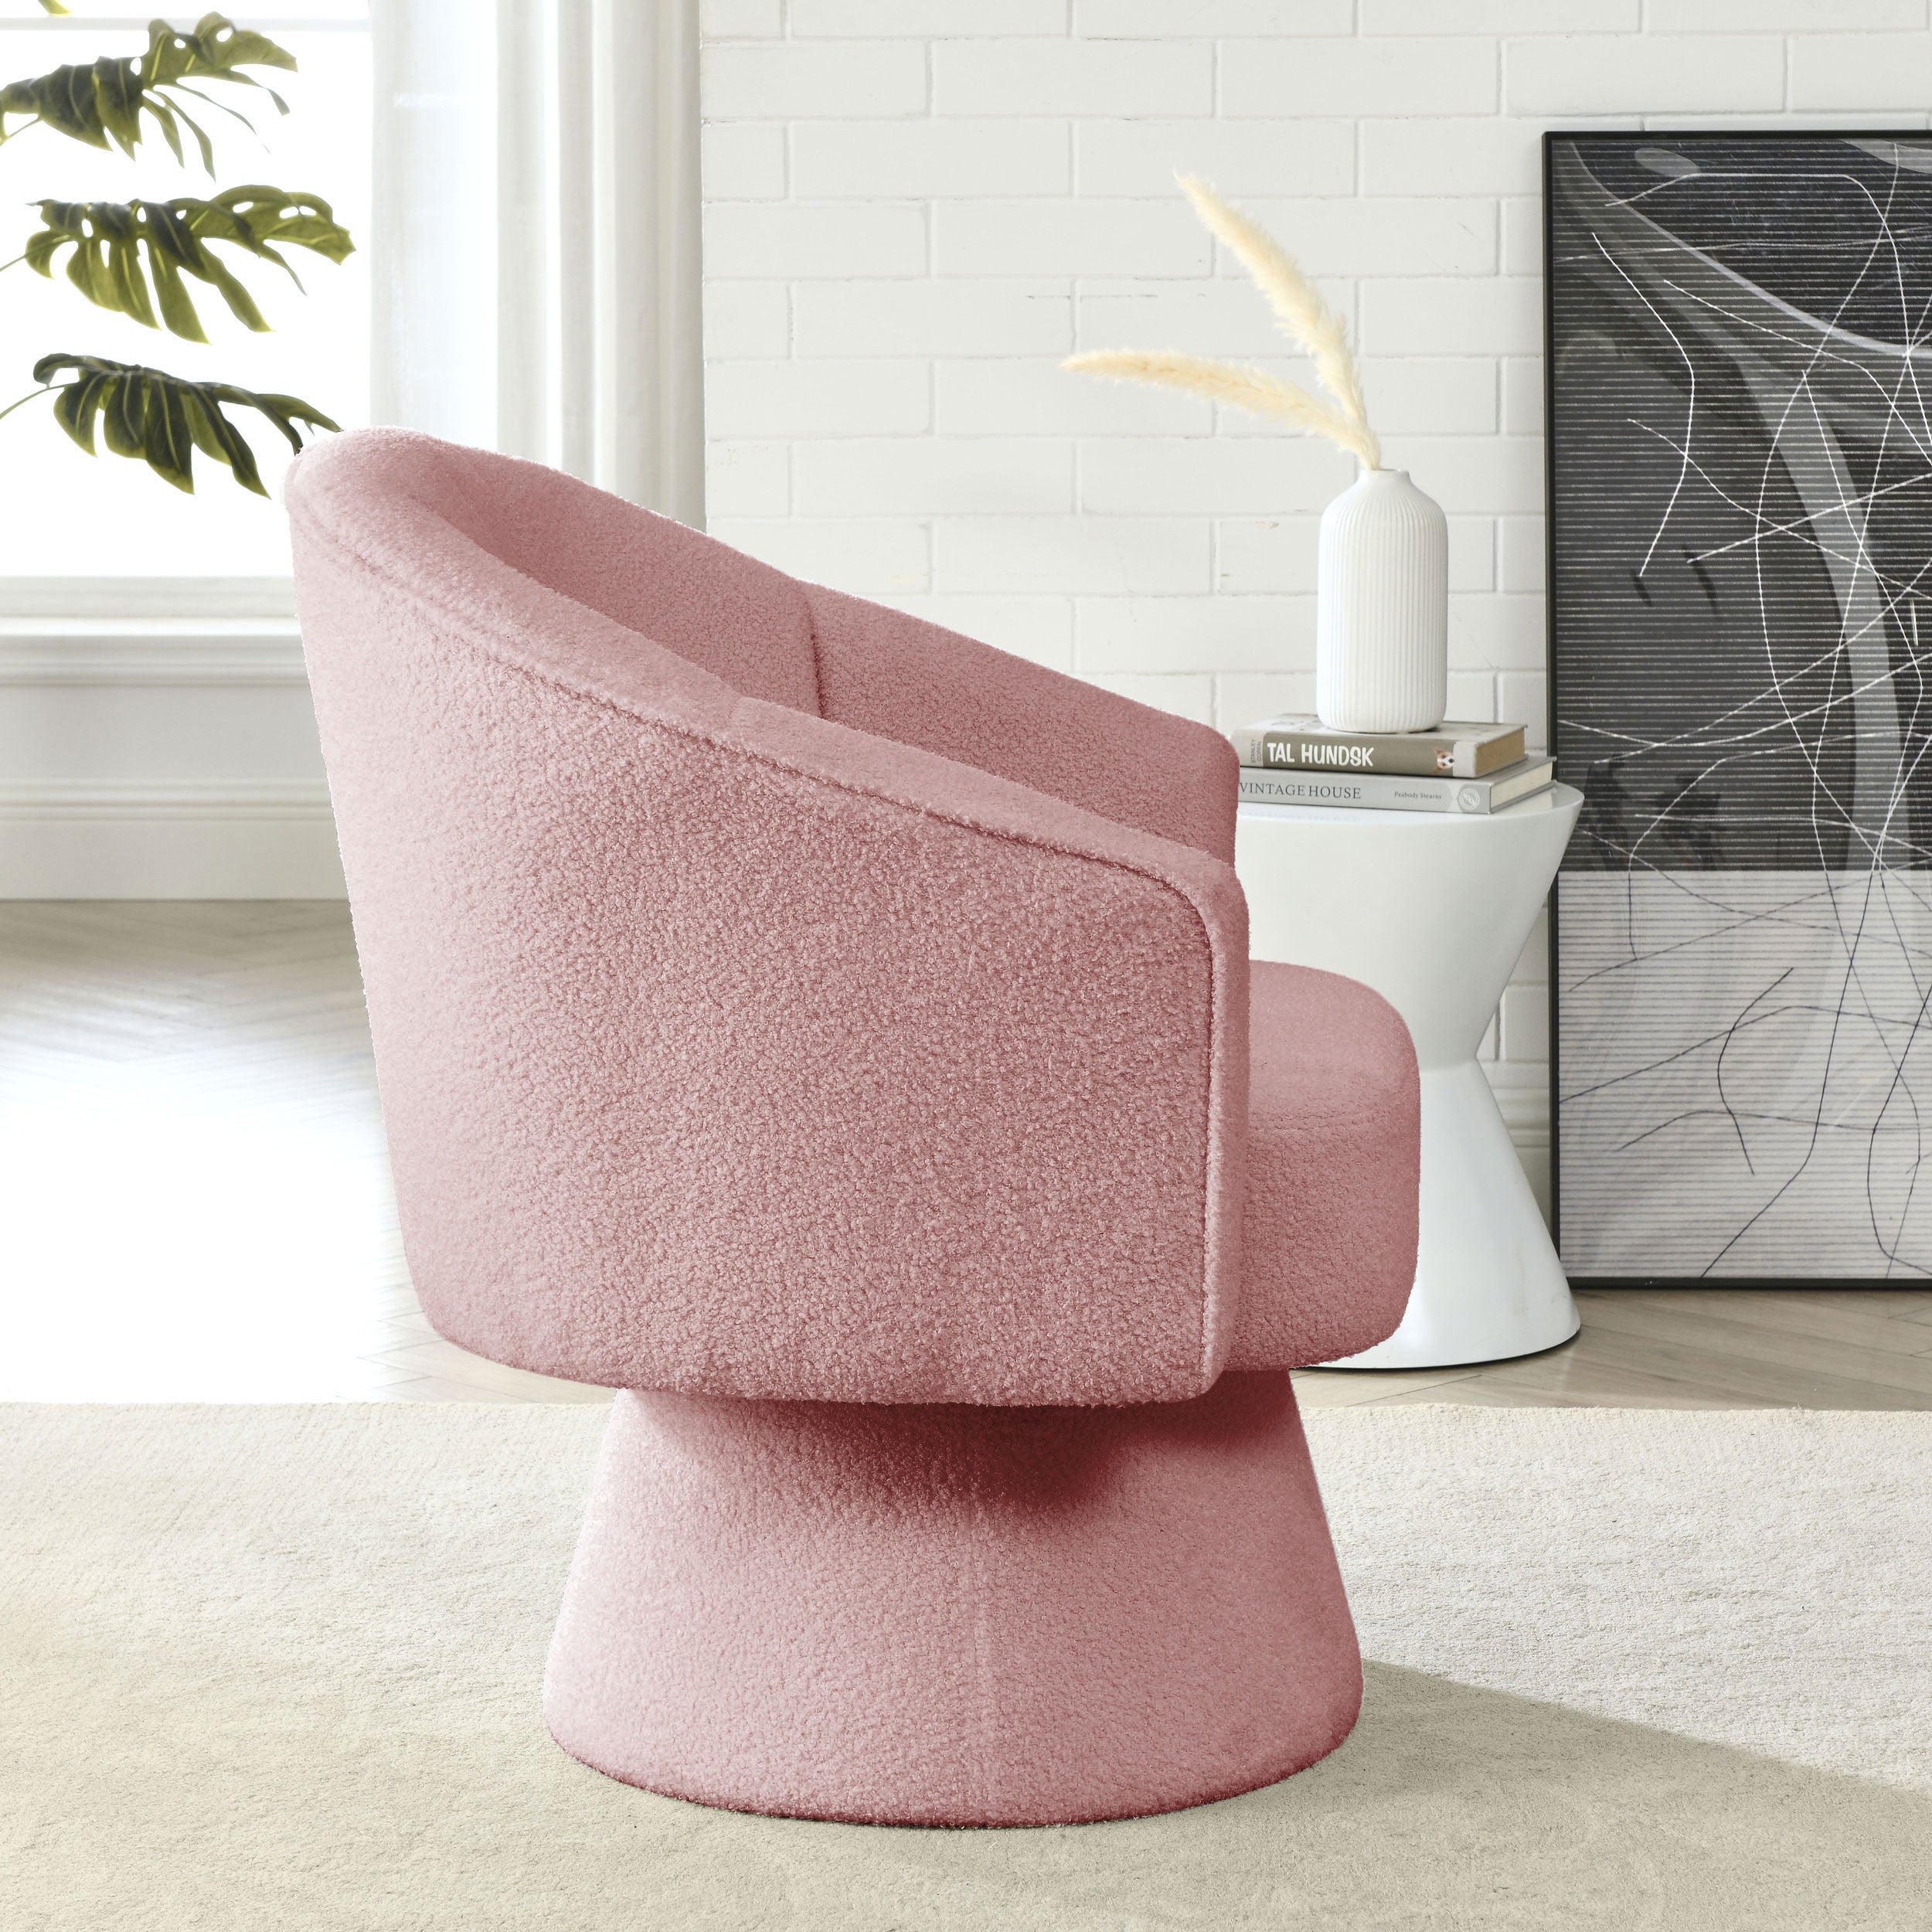 29 "W Petal Modern Contemporary Accent Lounge Swivel Chair with Deep Channel Tufting and Base - Pink Teddy